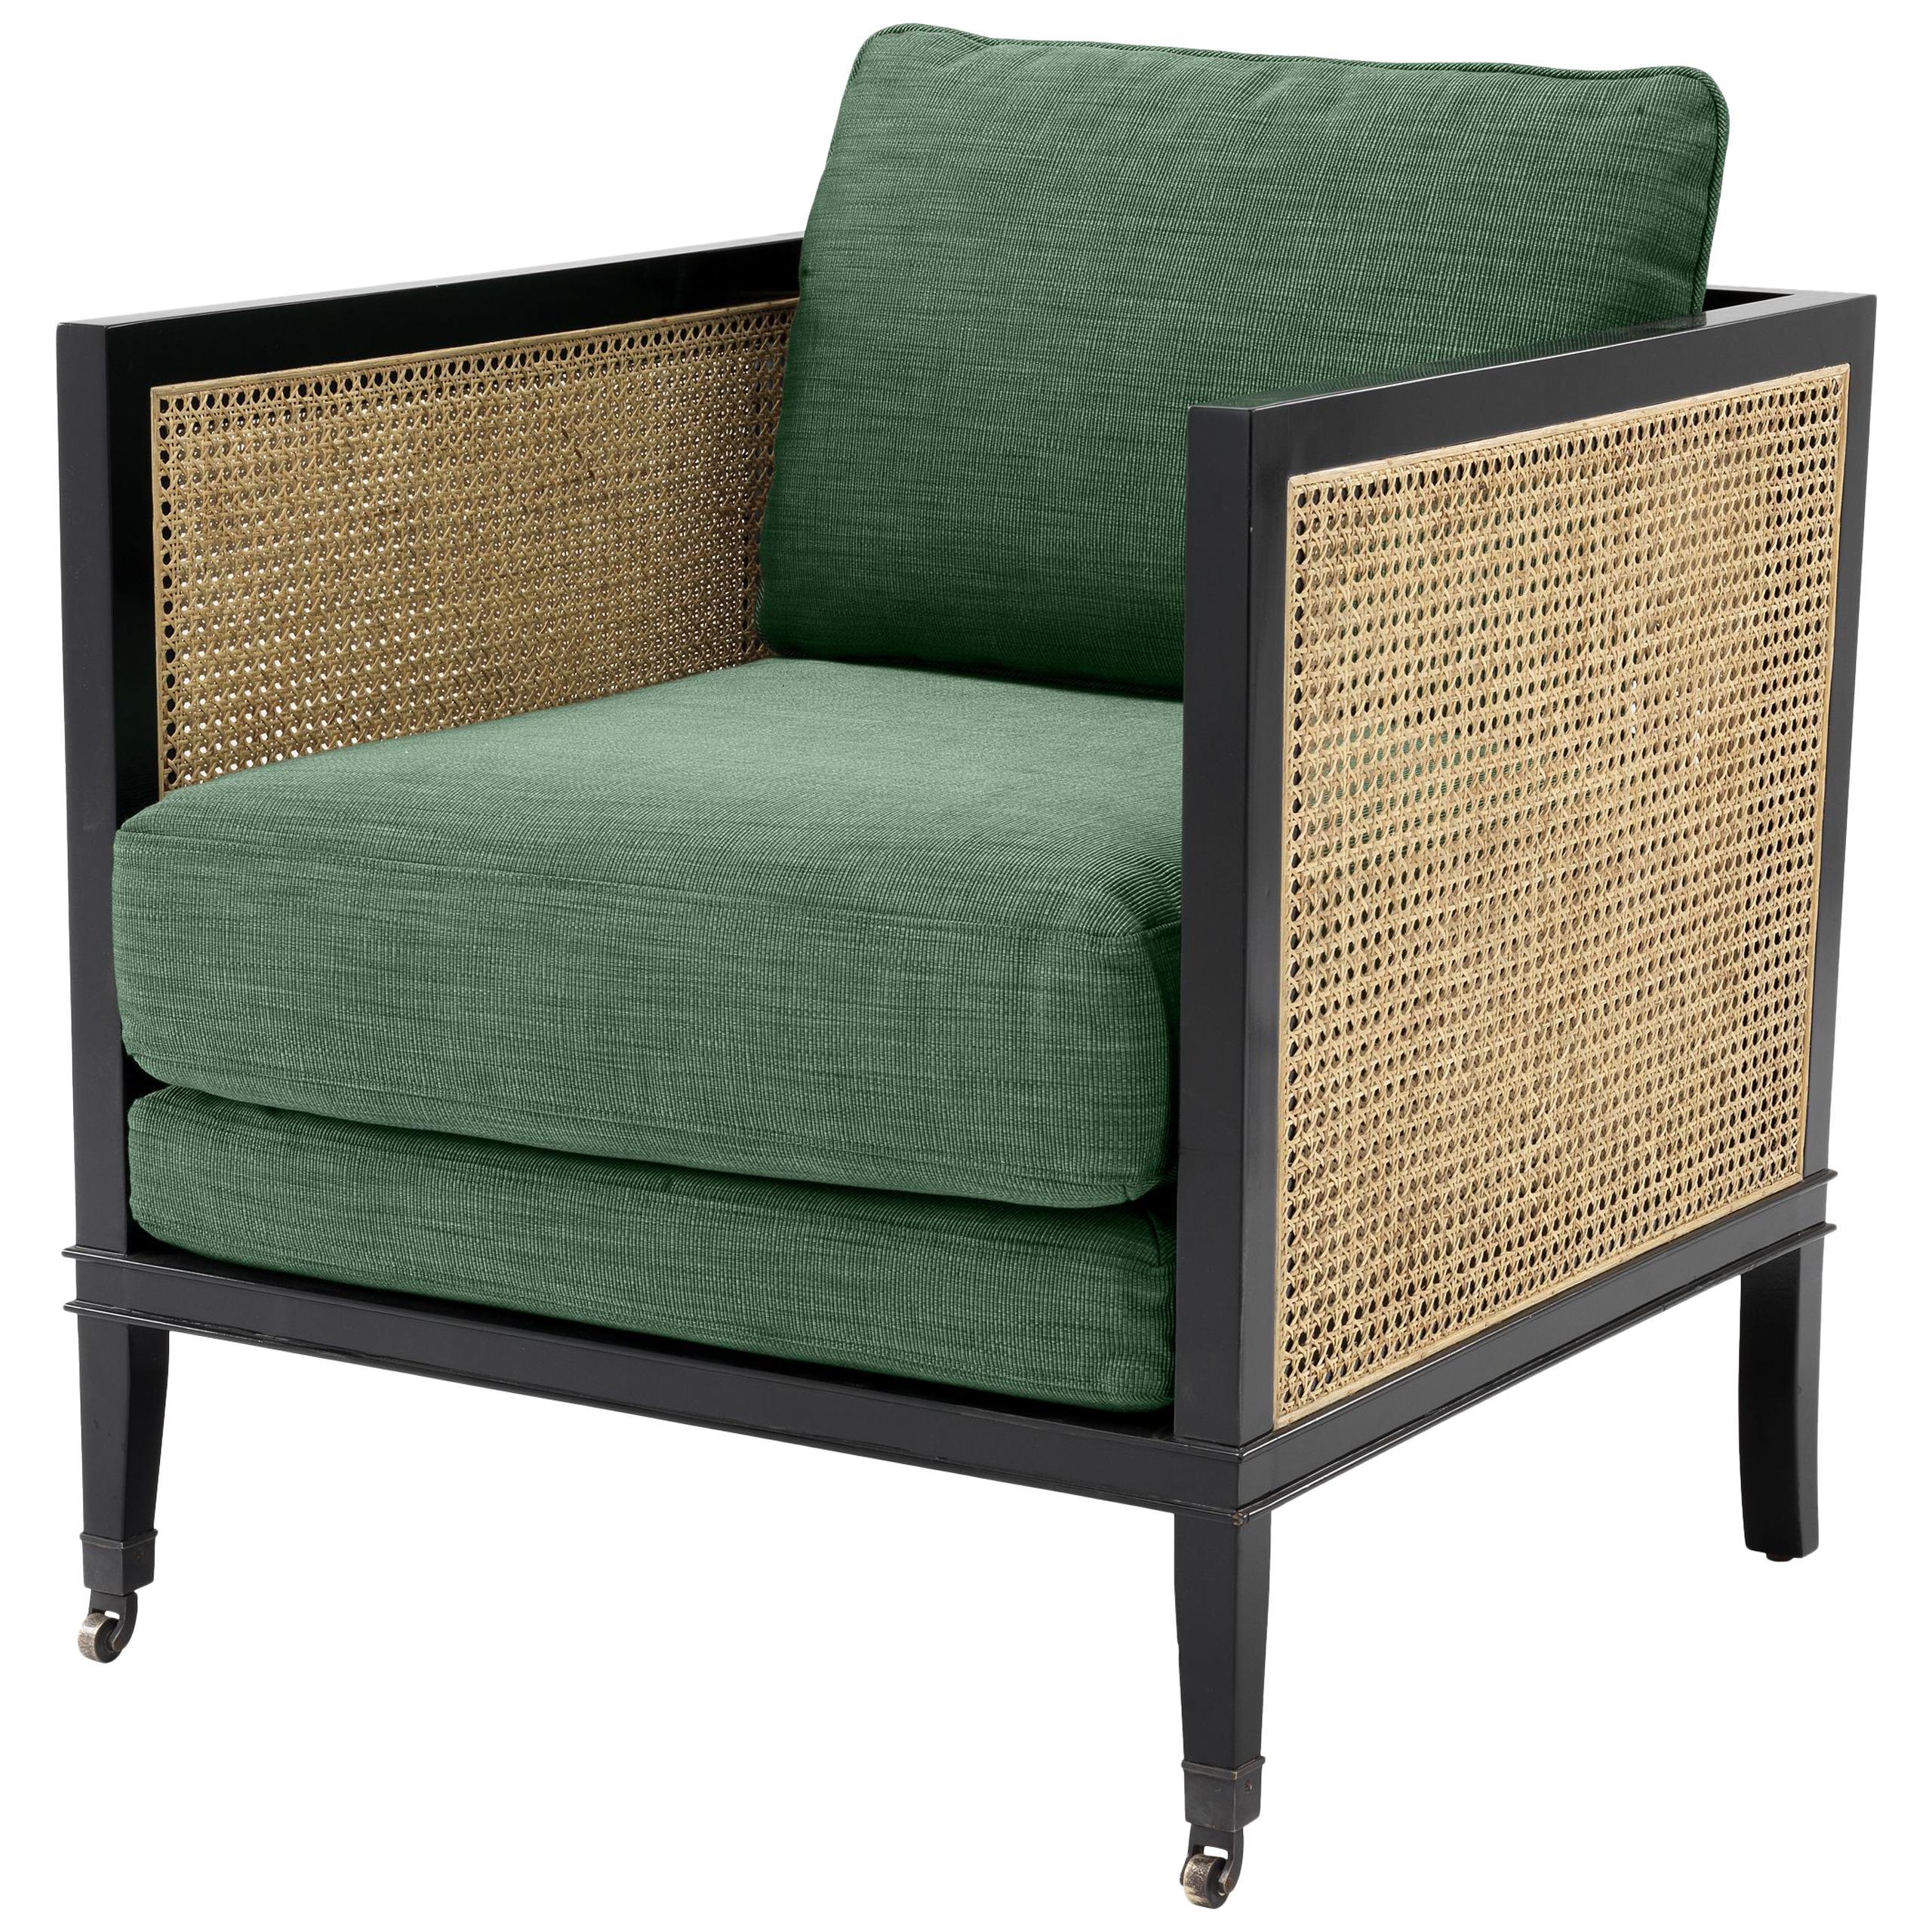 Black Lacquer Mahogany Wooden and Woven Cane Lounge Armchair